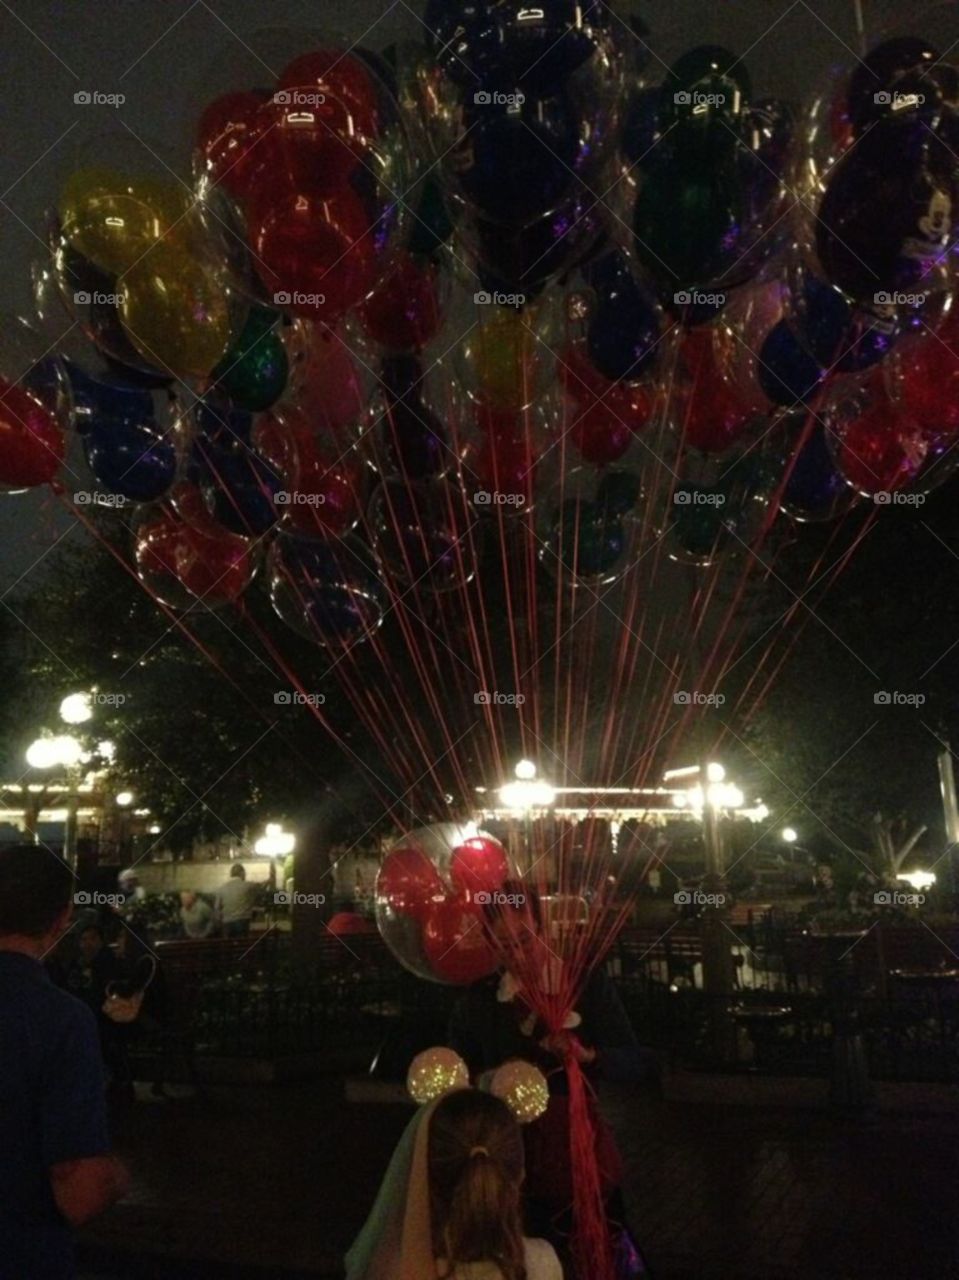 Disney Land balloon bouquet. went to Disney Land for the first time. It was amazing so magical